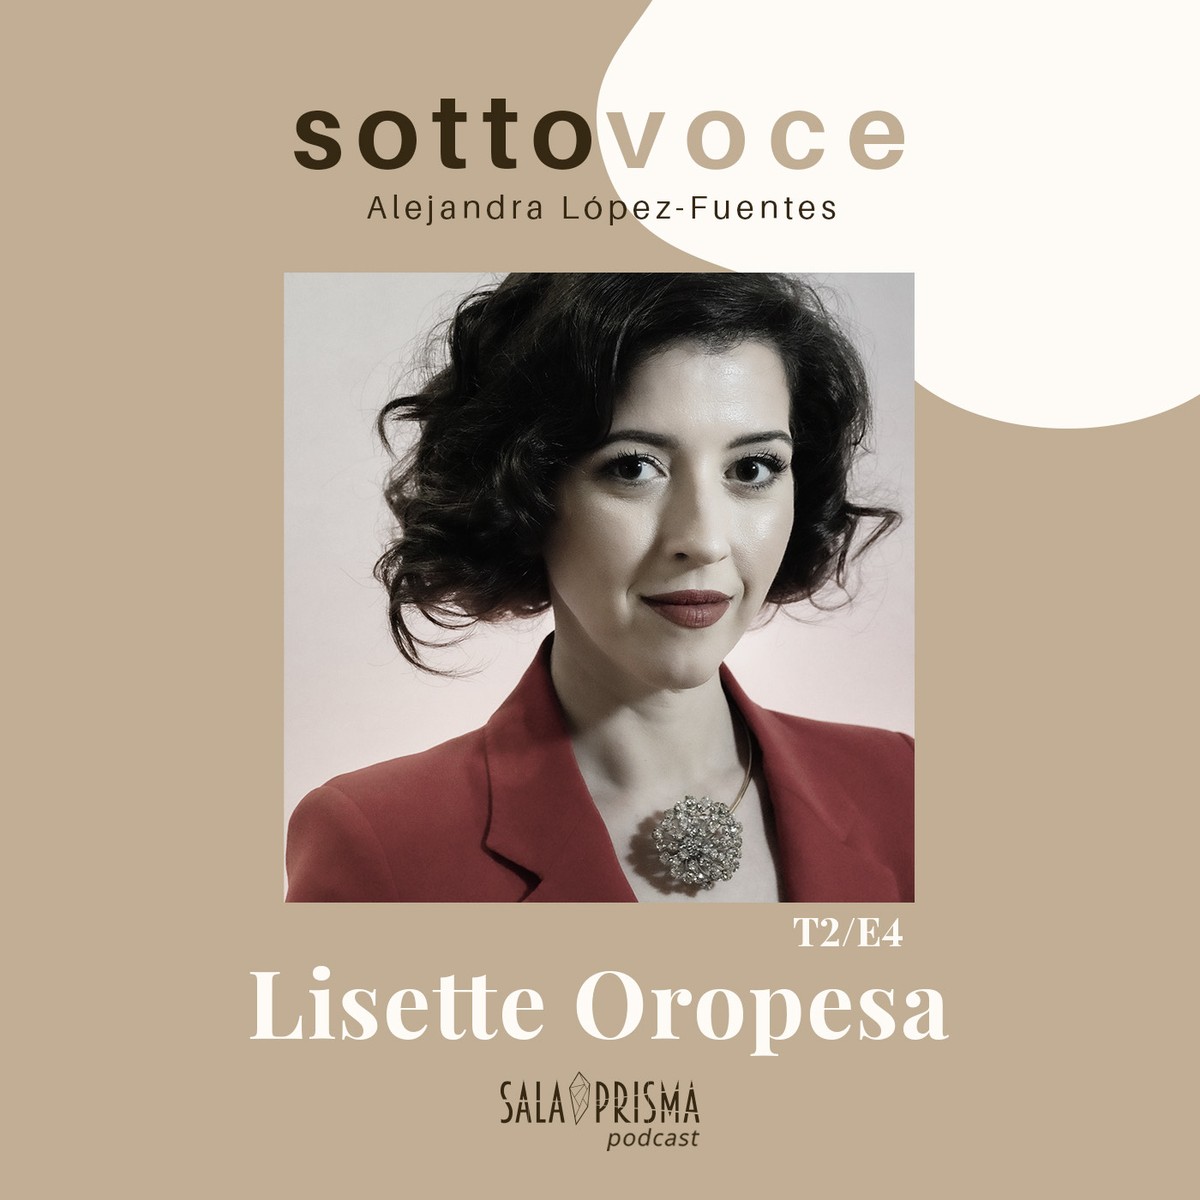 Lisette is interviewed on the podcast, Sotto Voce